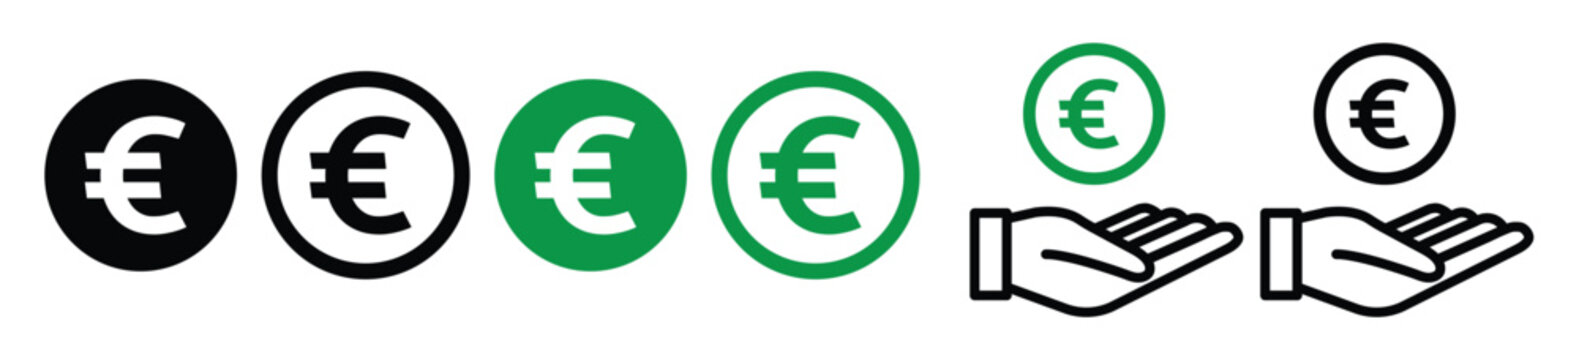 10 Euro sign icon. EUR currency symbol. Stock Photo by ©Blankstock 41191713